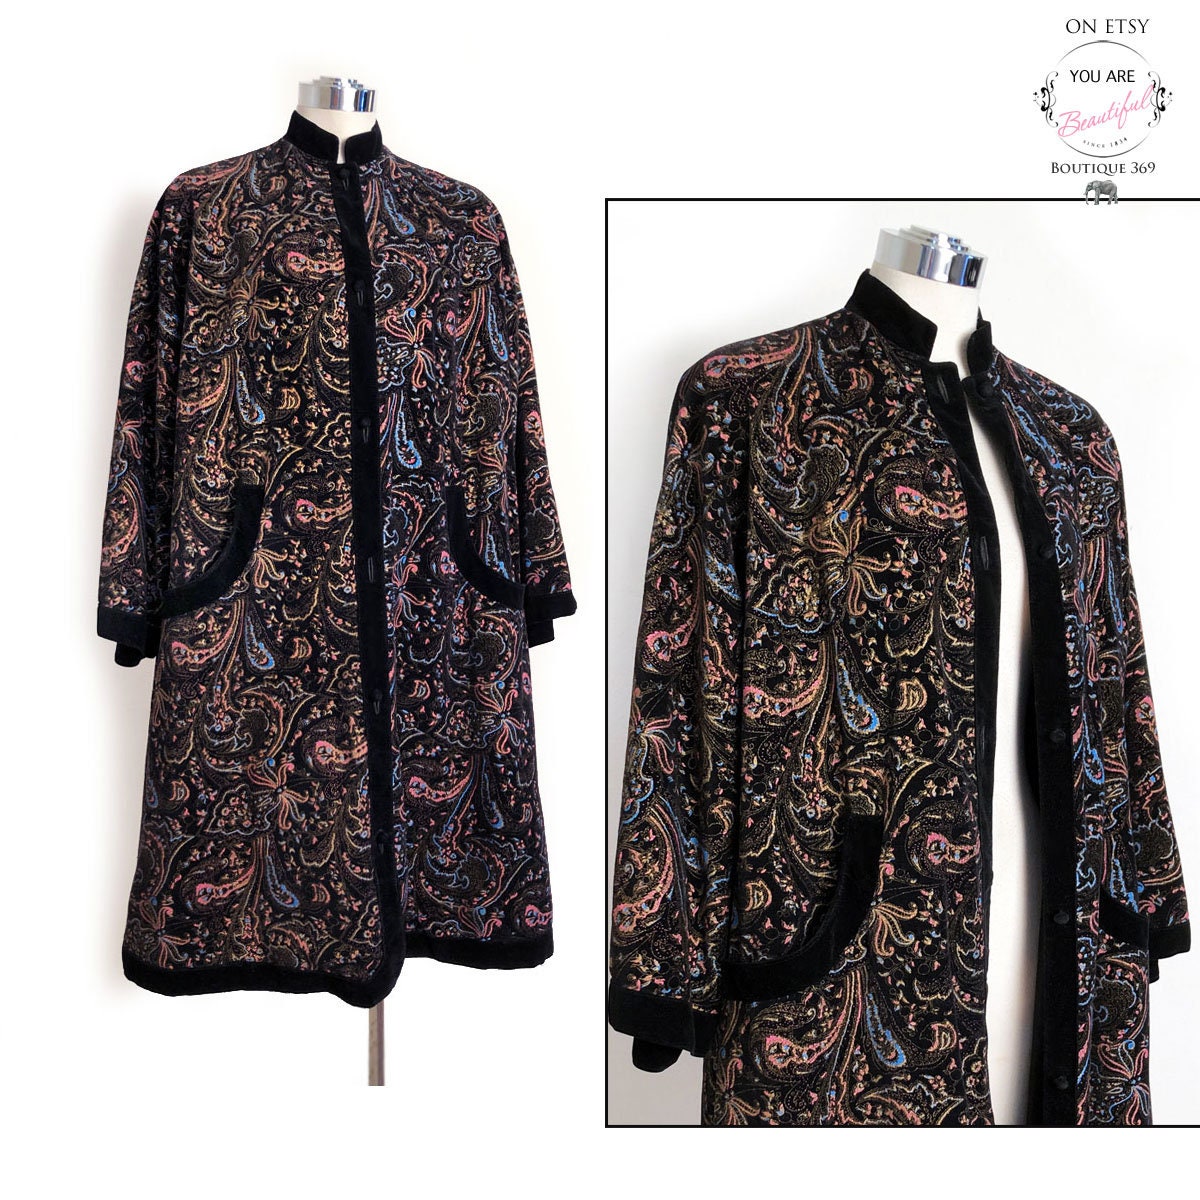 1960s Coats and Jackets 50s Special Vintage Velvet Coat, 1950s Black Paisley Print Evening Over Opera, Painted 1960s Mid Century Neru Collar $229.00 AT vintagedancer.com